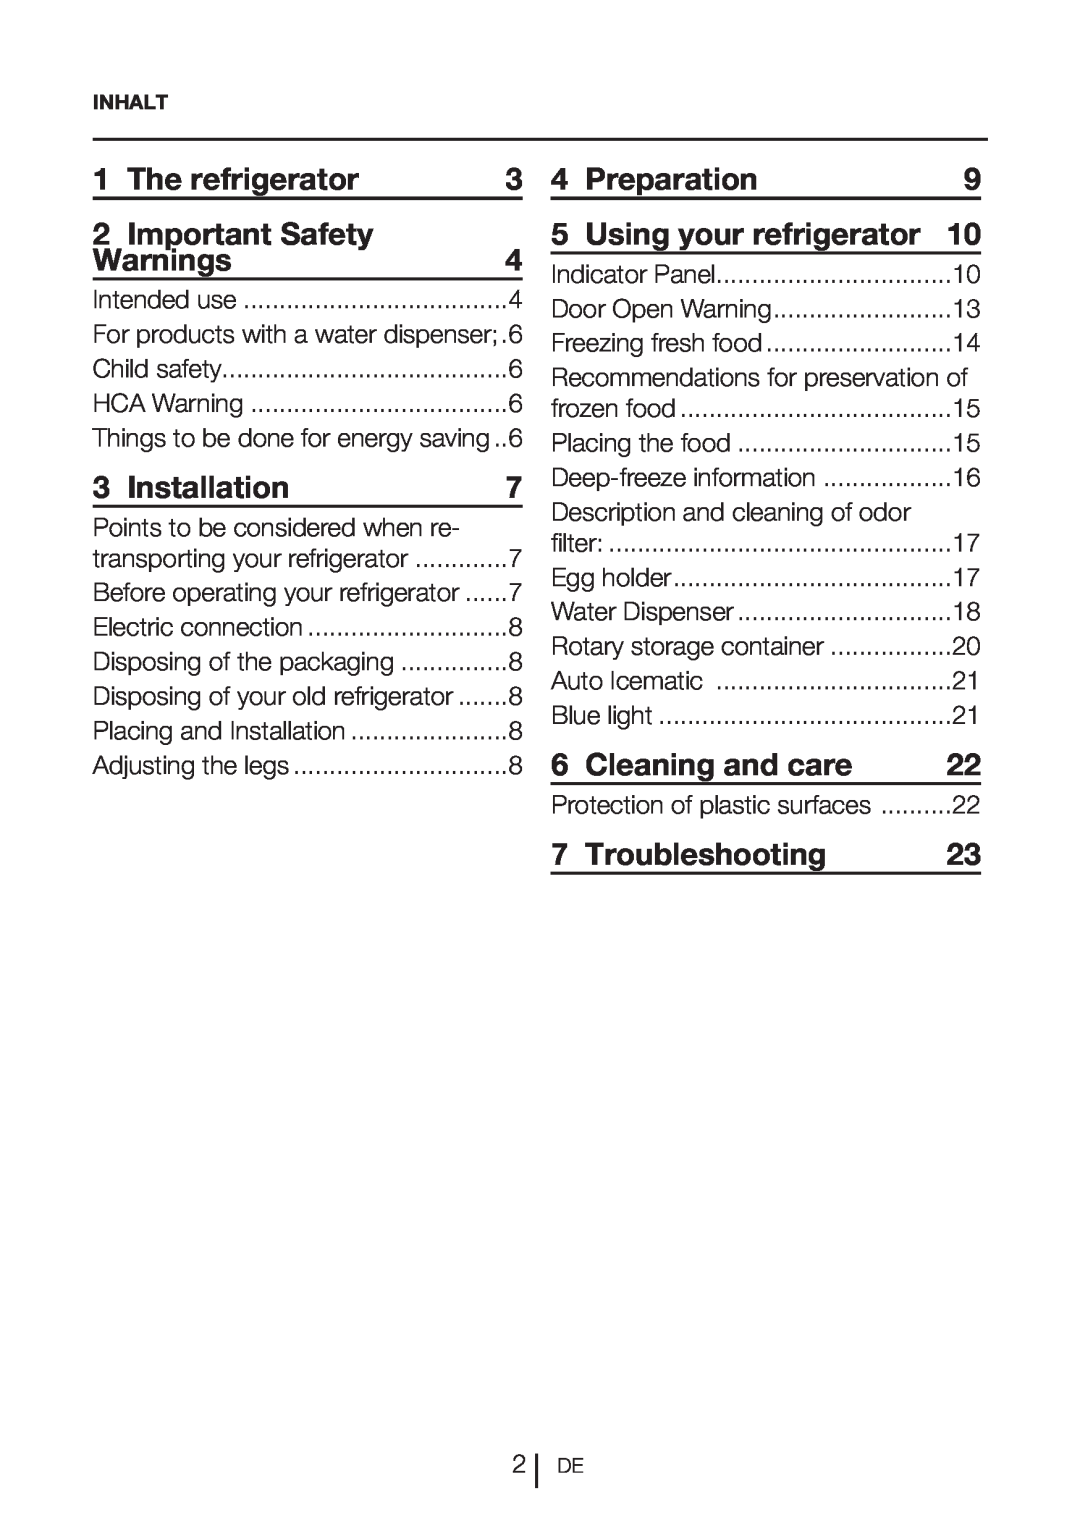 Blomberg DND 9977 PD The refrigerator, Important Safety, Installation, Warnings, Preparation, Using your refrigerator 